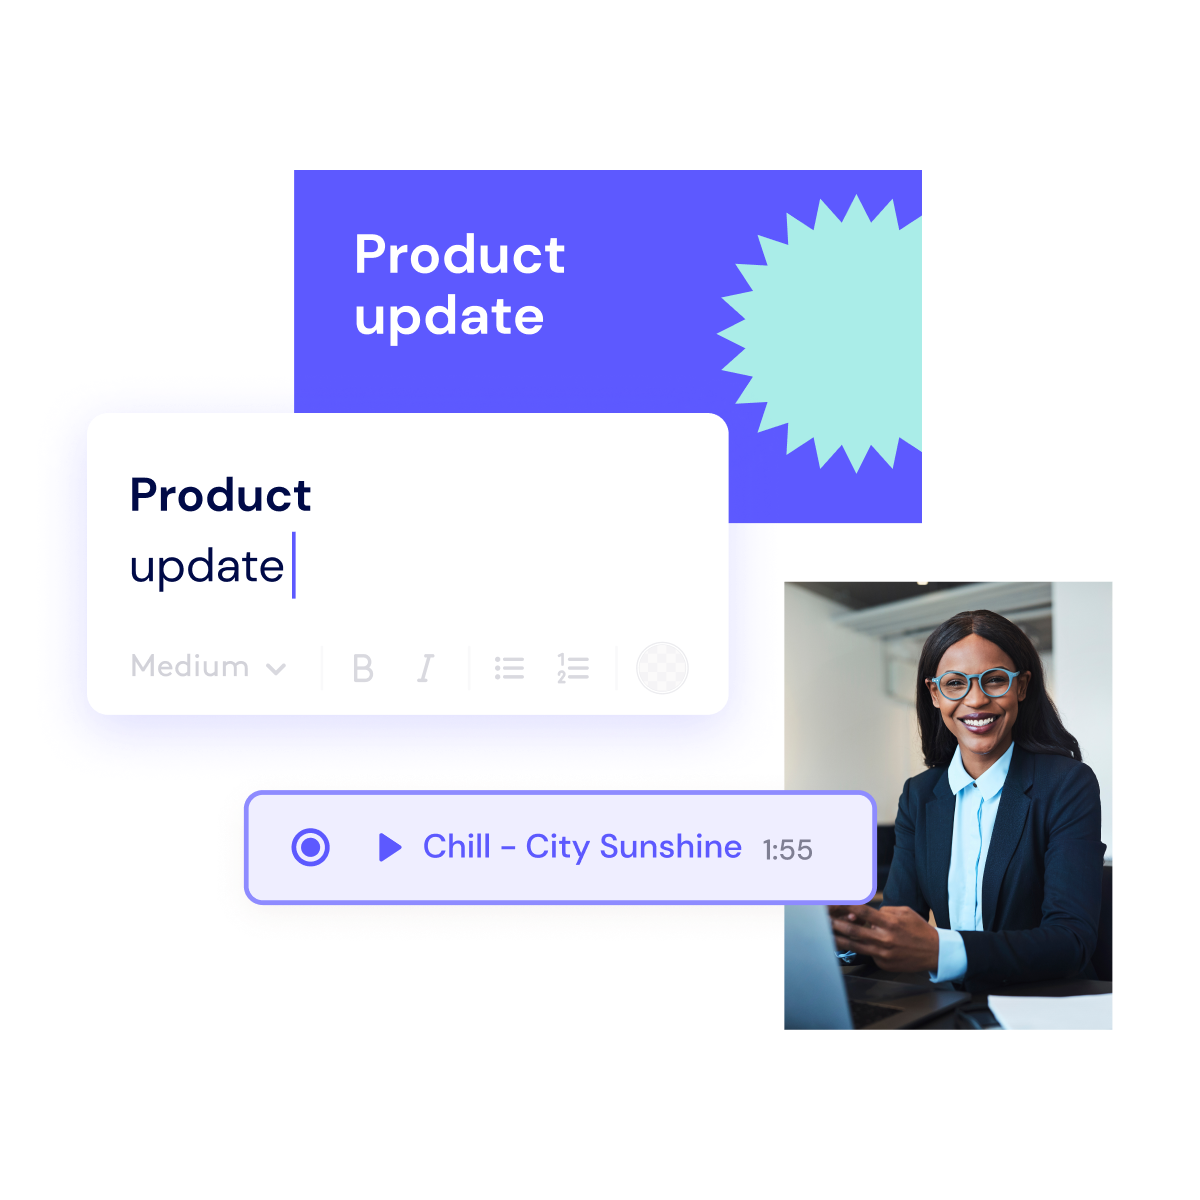 A professional woman in business attire smiles while a graphic of a product update notification is displayed in the foreground.